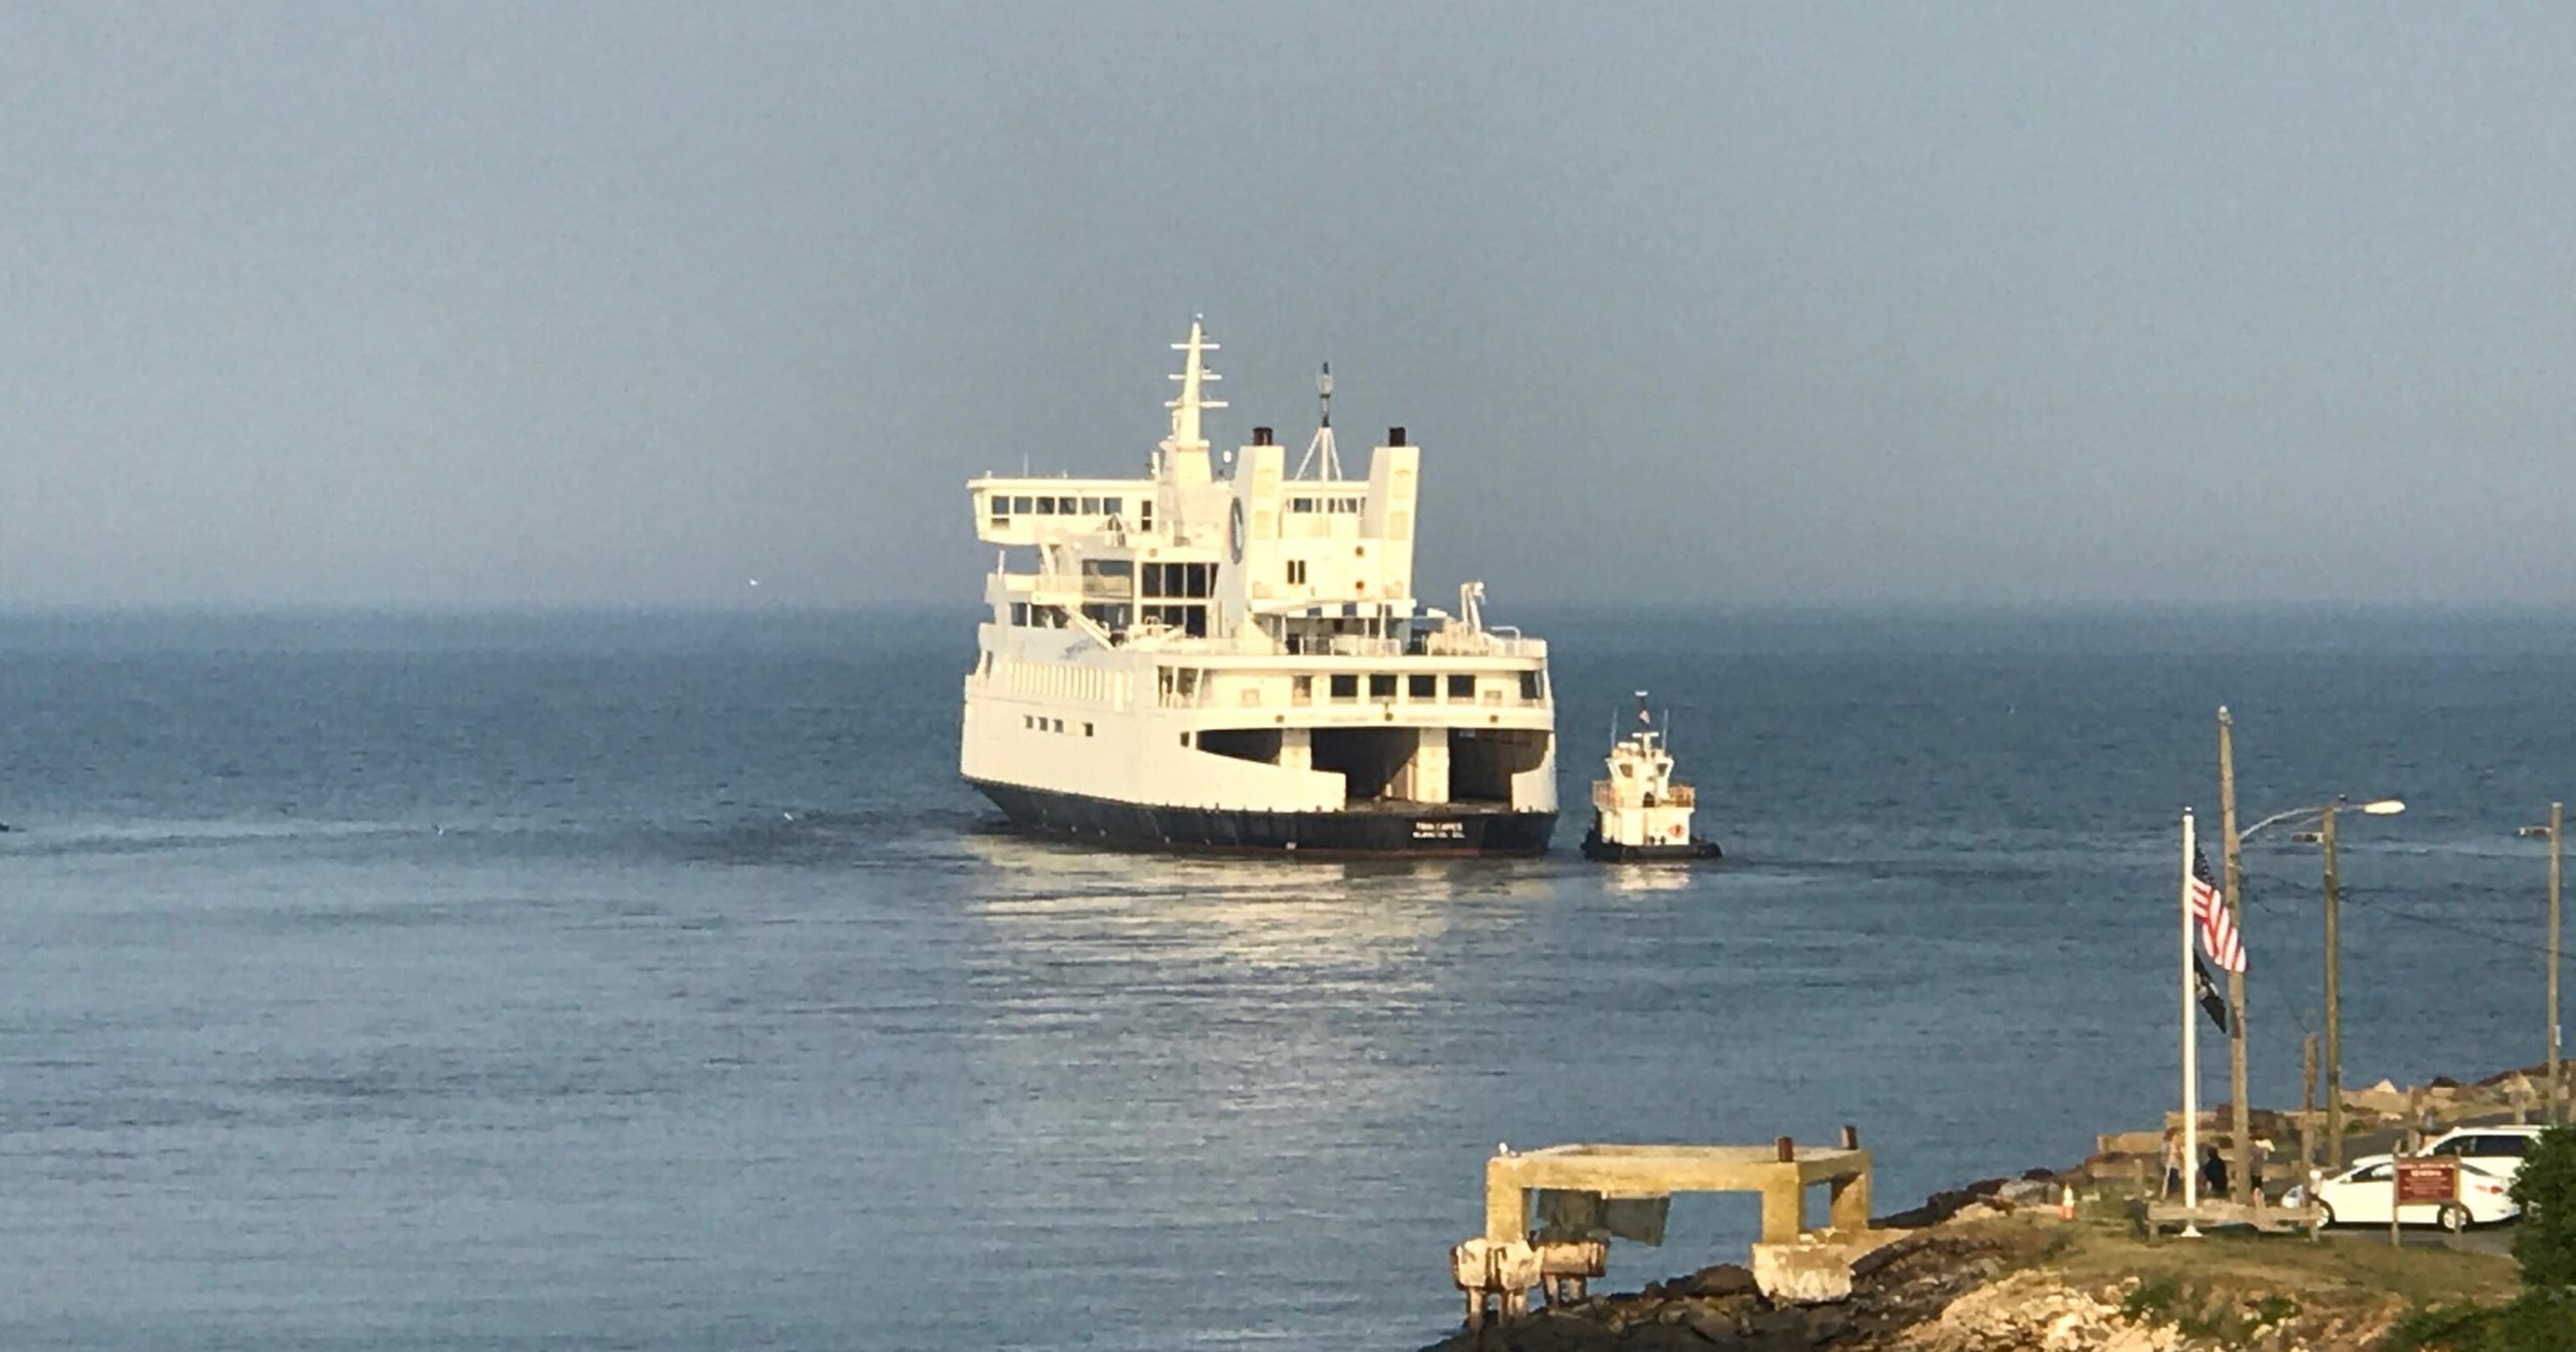 Cape May Lewes Ferry Sinking Watch Video As It Becomes Part